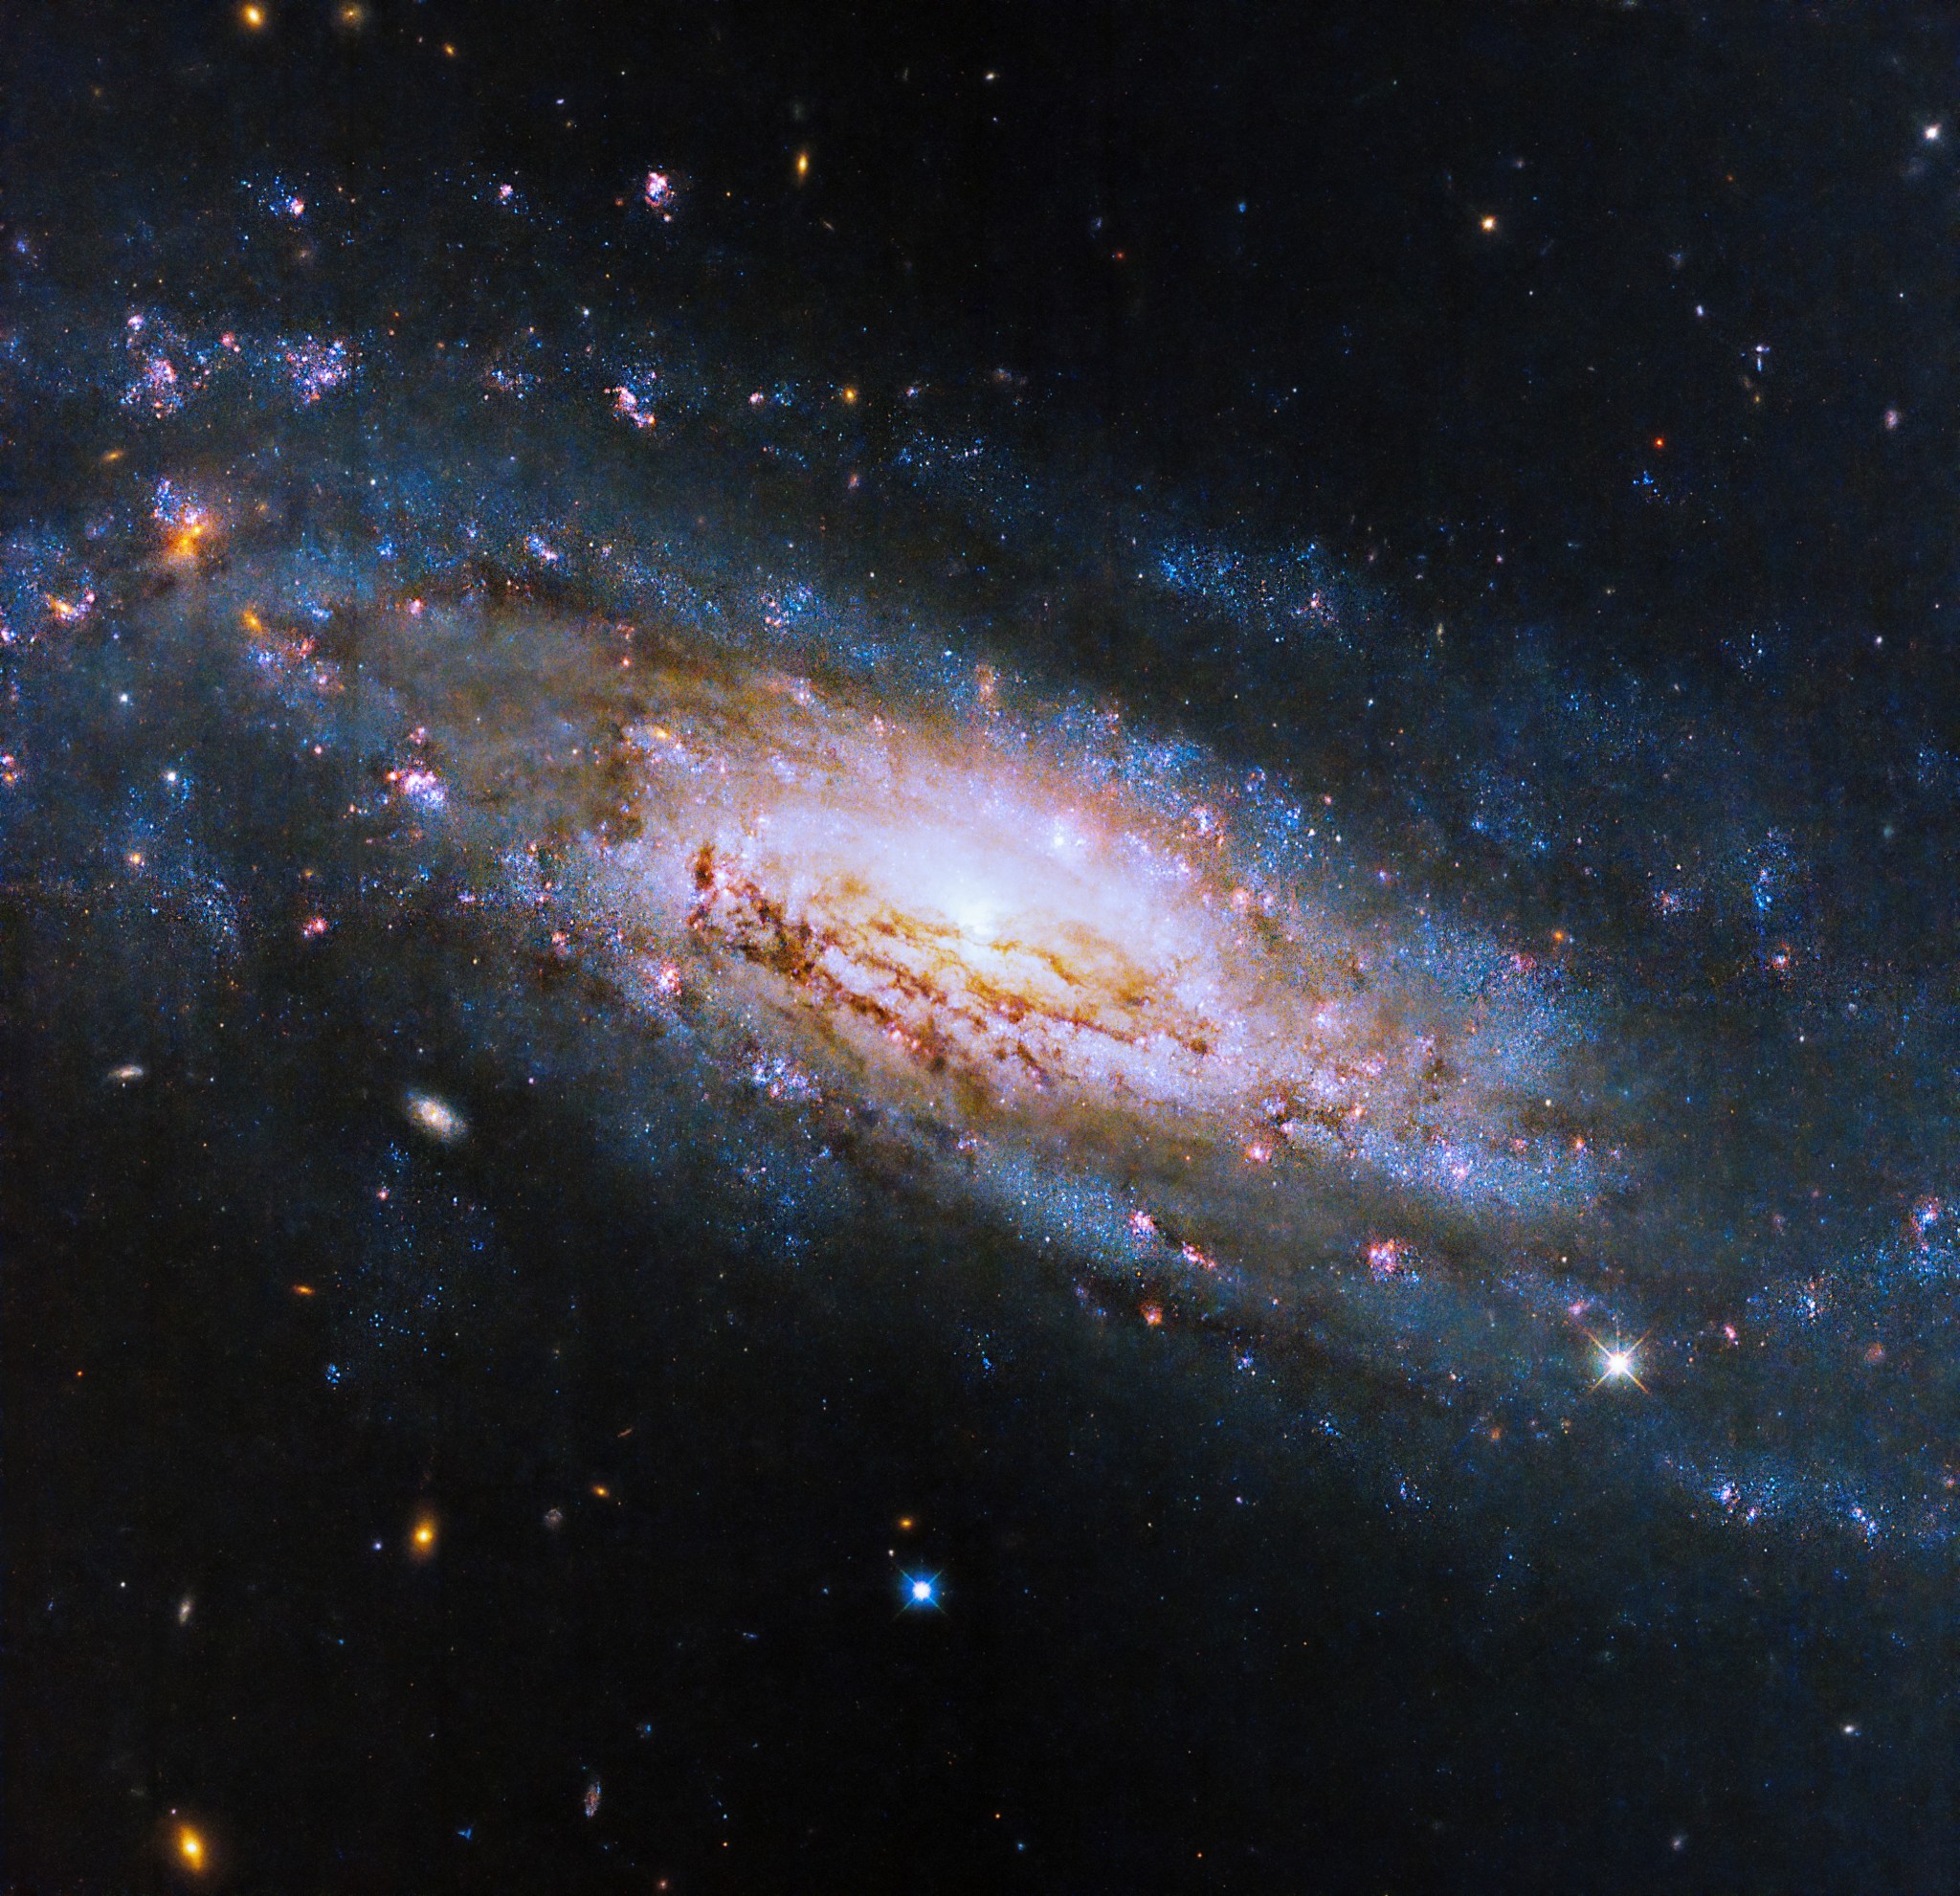 A massive spiral galaxy fills the image. A bright, yellow galactic core glows at the center, surrounded by spiral arms studded with pink stars and dark lanes of dust.